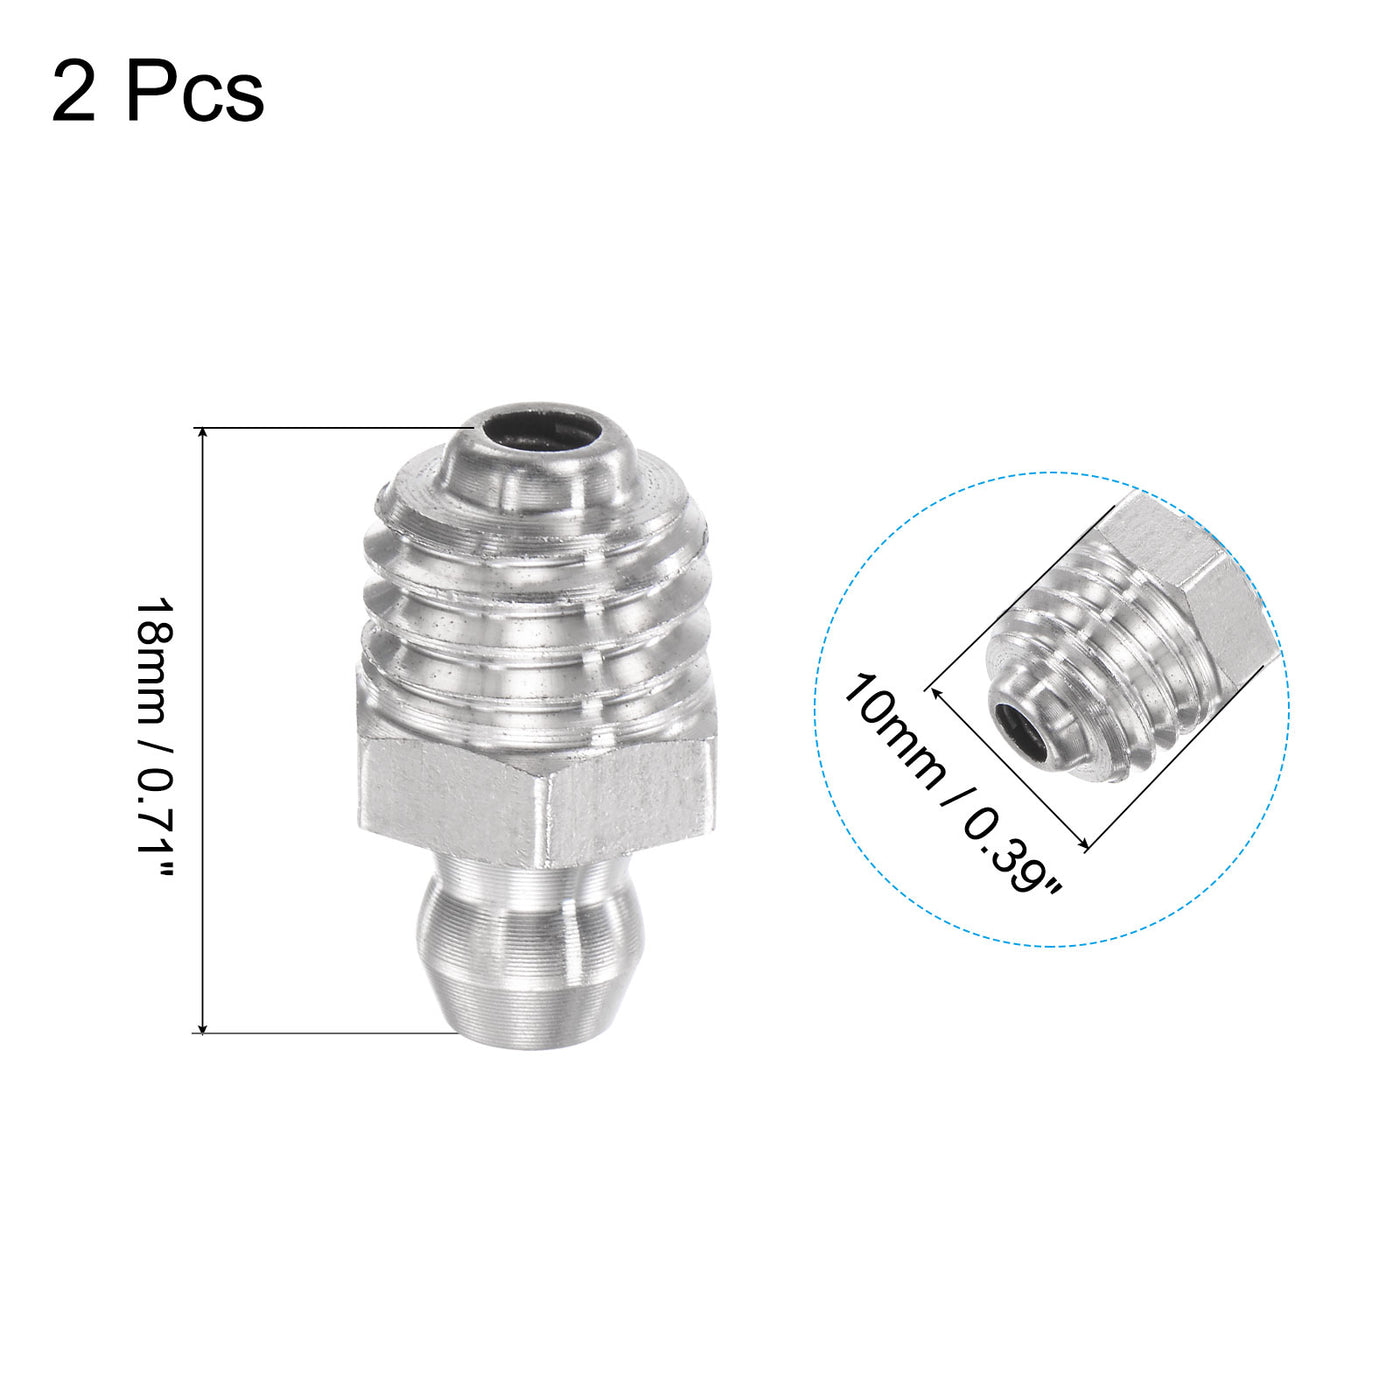 uxcell Uxcell 2Pcs Metric Stainless Steel Straight Hydraulic Grease Fitting M10 x 1.5mm Thread